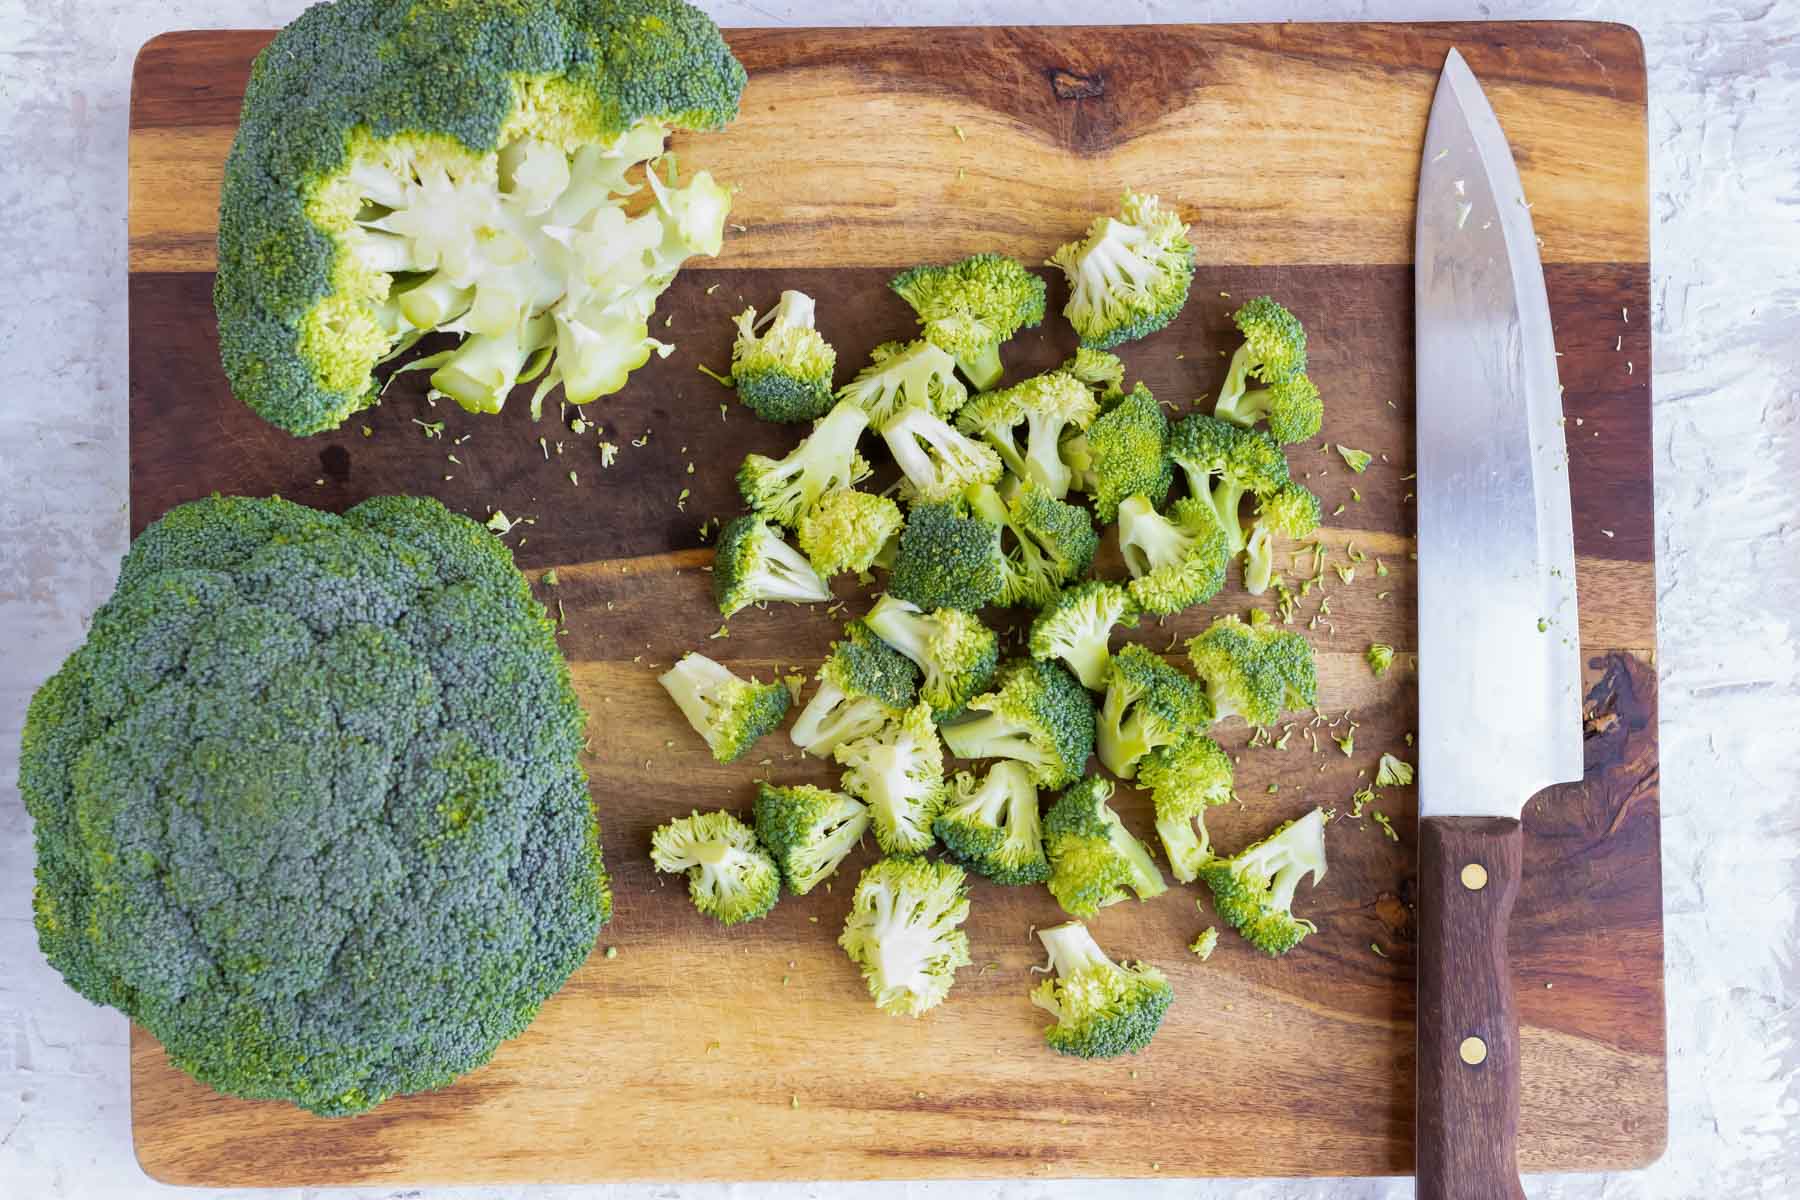 Broccoli florets and stalks chopped with a sharp knife on a wooden cutting board.